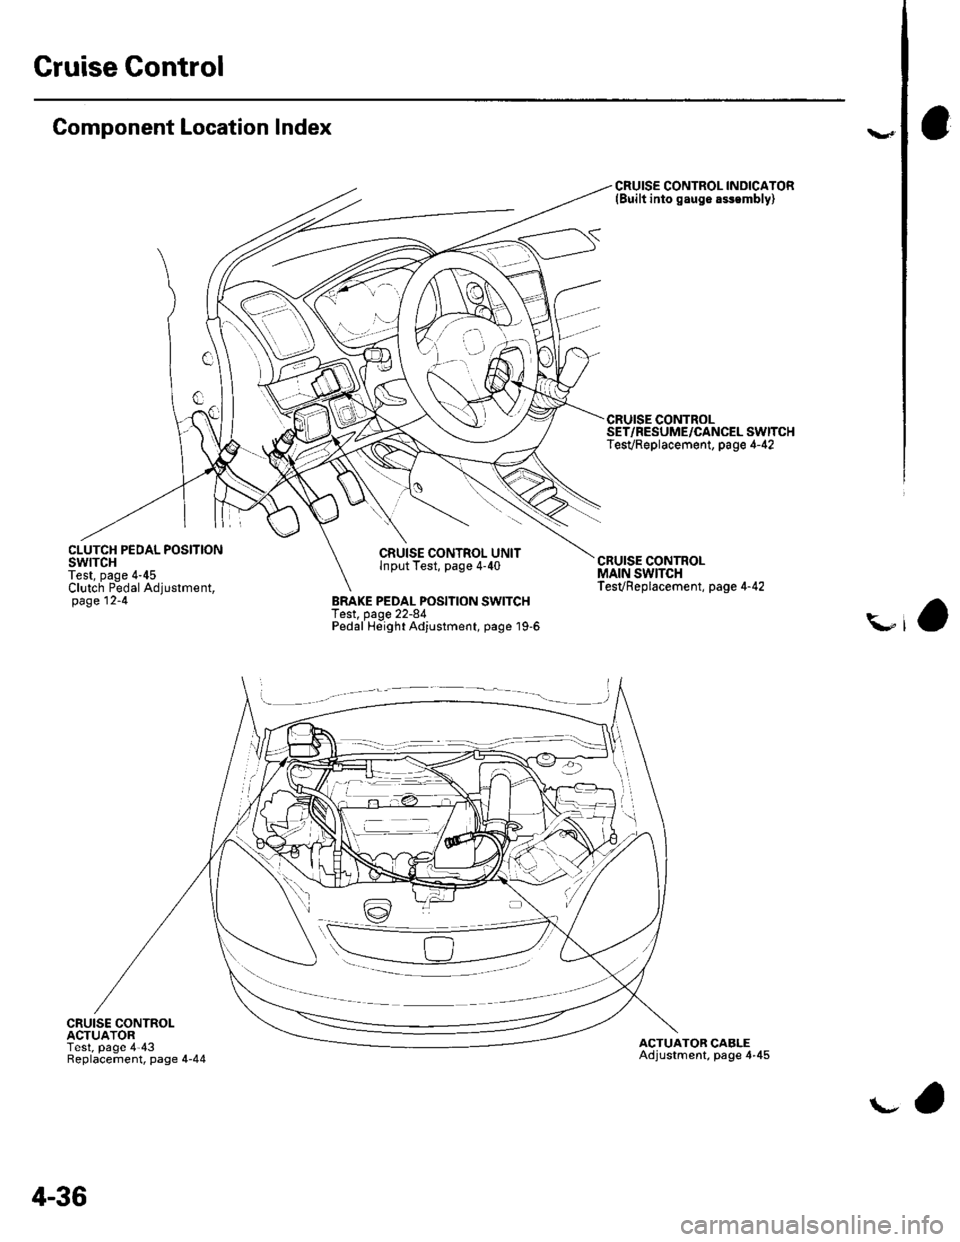 HONDA CIVIC 2003 7.G Workshop Manual Gruise Control
Component Location Index
CLUTCH PEDAL POSITIONswtTcHTest, page 4-45Clutch Pedal Adjustment,page 12-4
t.- _,- _
CRUISE CONTROLACTUATORTest, page 443Replacement, page 4-44
CRUISE CONTROL